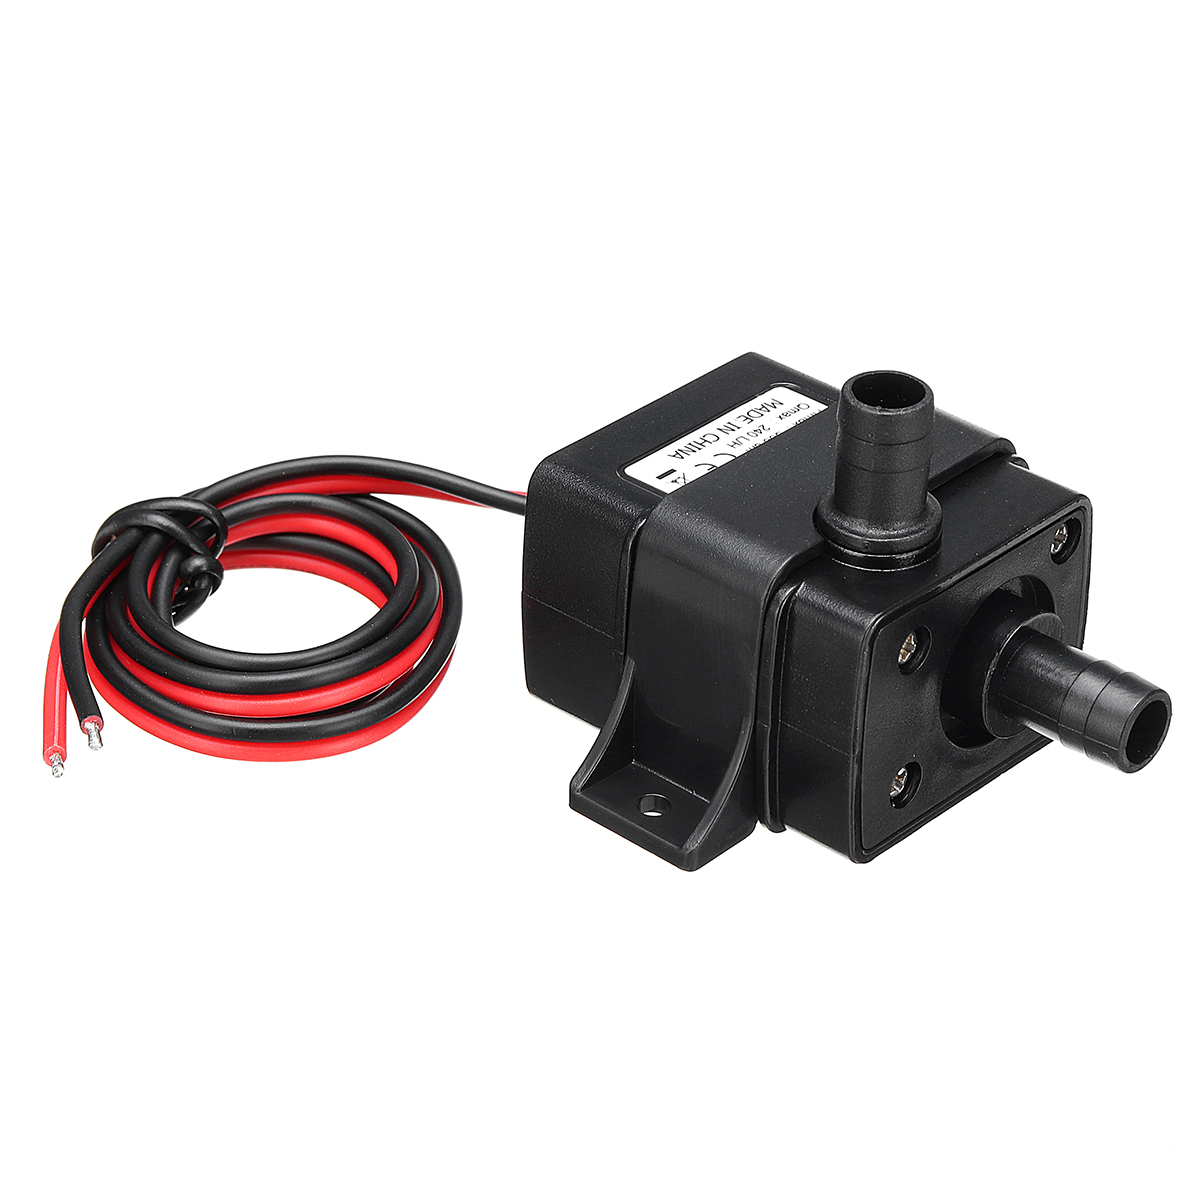 

DC 12V 3M Micro Electric Brushless Water Pump Submersible Pumping for Aquarium Fish Fountain 240L/H